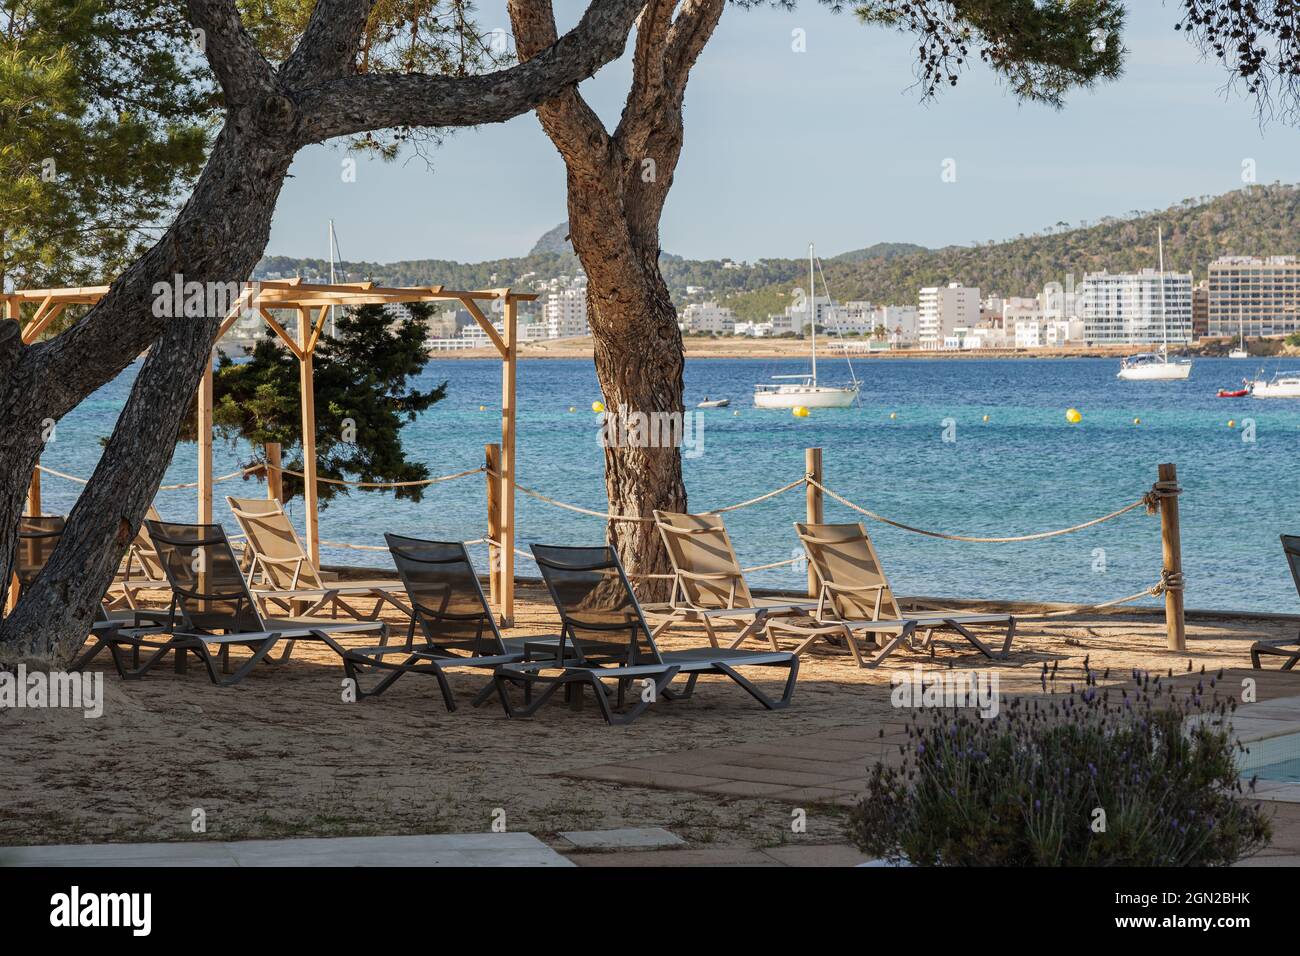 Sunbeds on the beach with the view to a bay with yachts on Ibiza island. Beautiful relax zone close to the sea with lounge chairs under large trees. Stock Photo